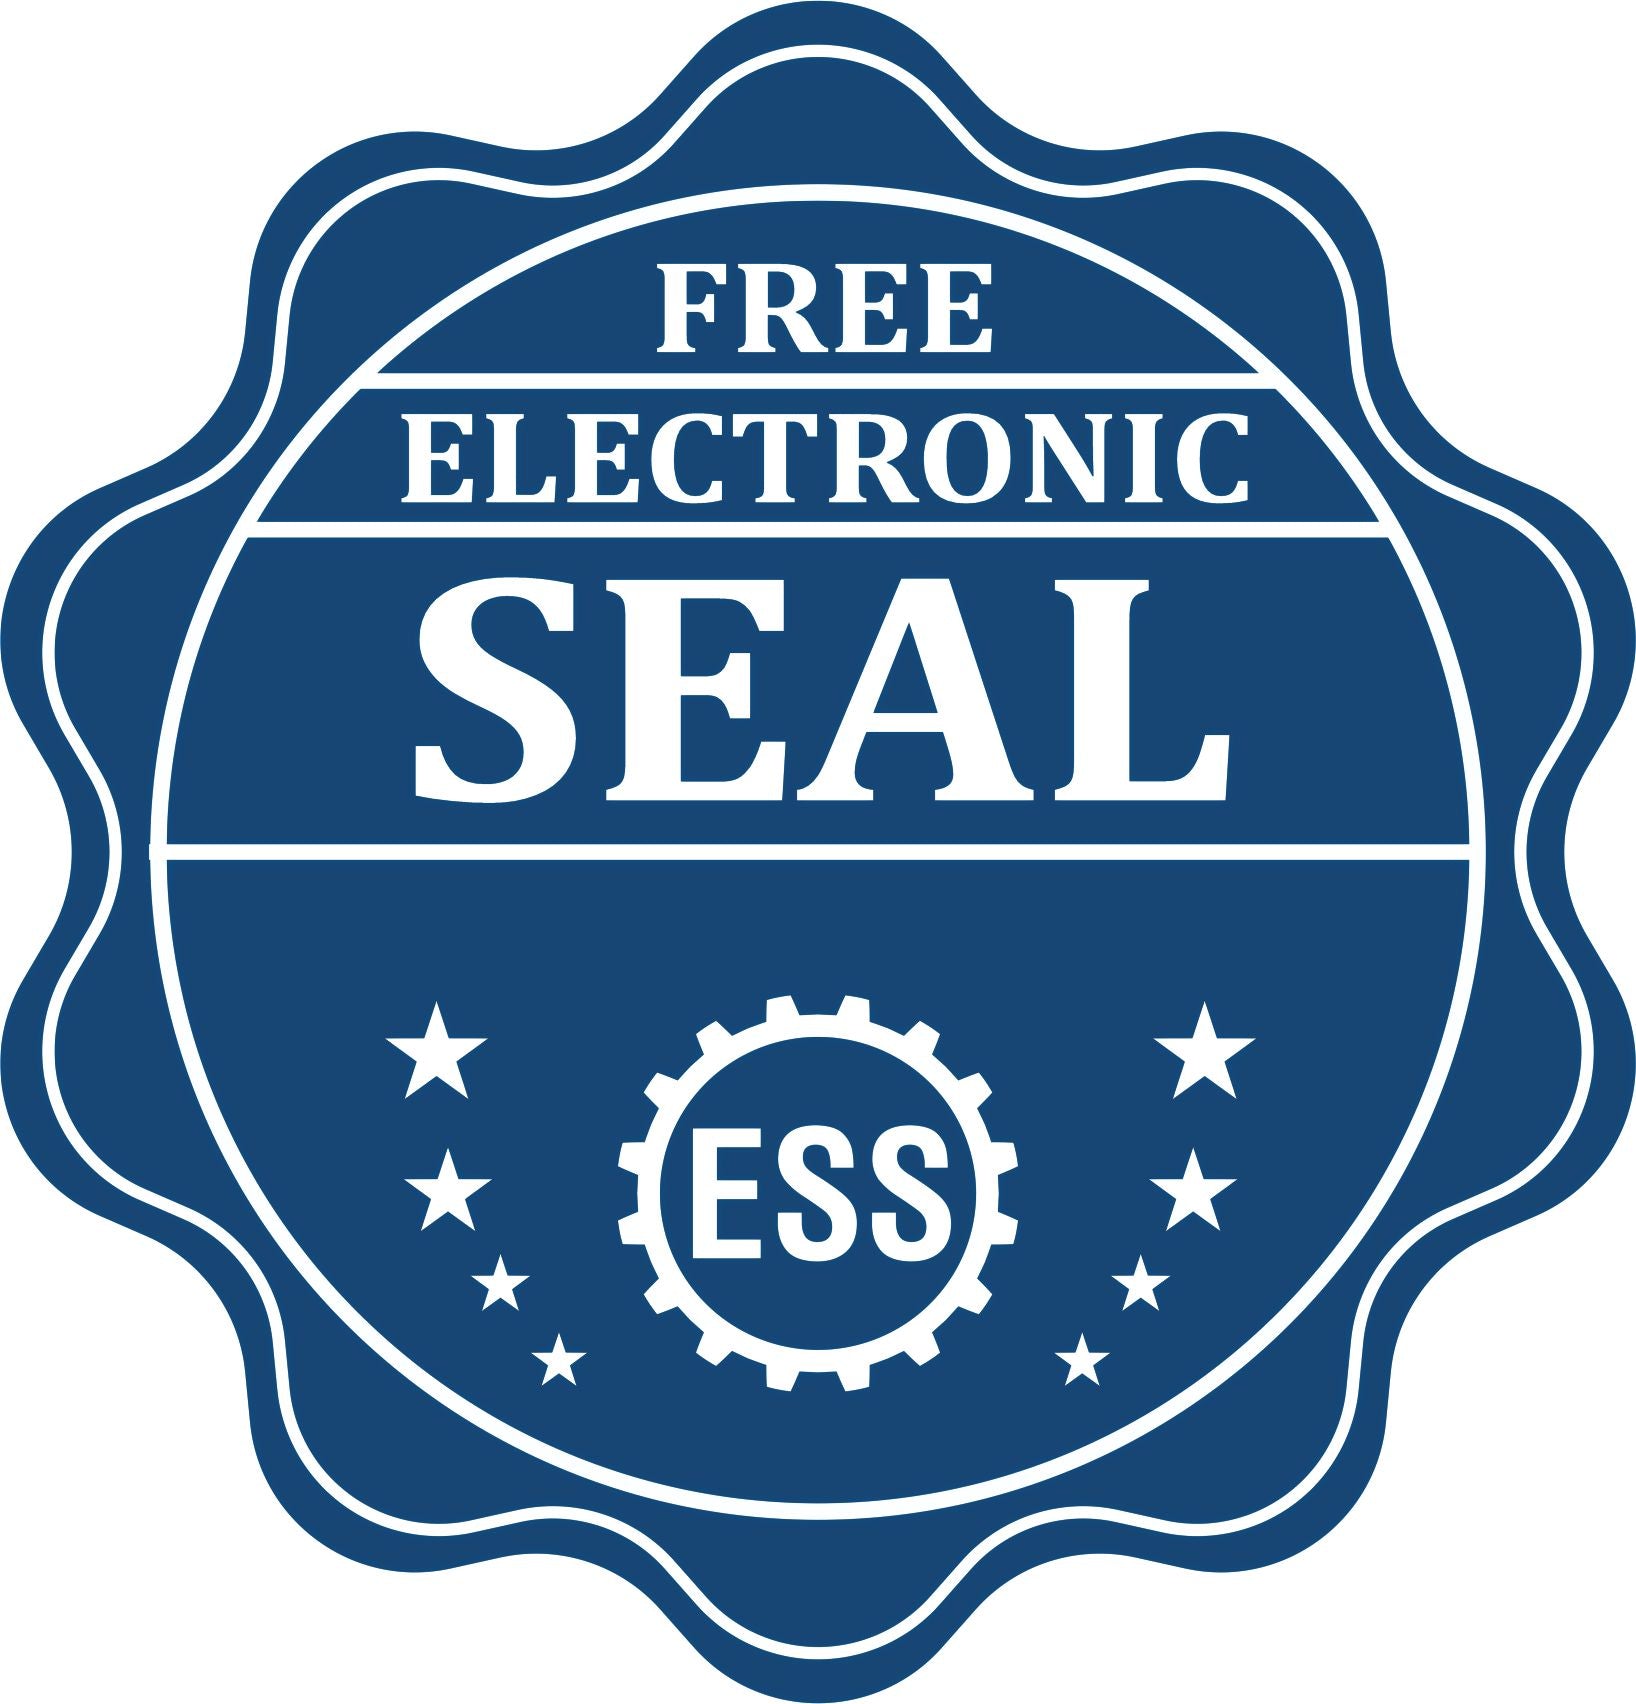 A badge showing a free electronic seal for the Handheld Kentucky Land Surveyor Seal with stars and the ESS gear on the emblem.